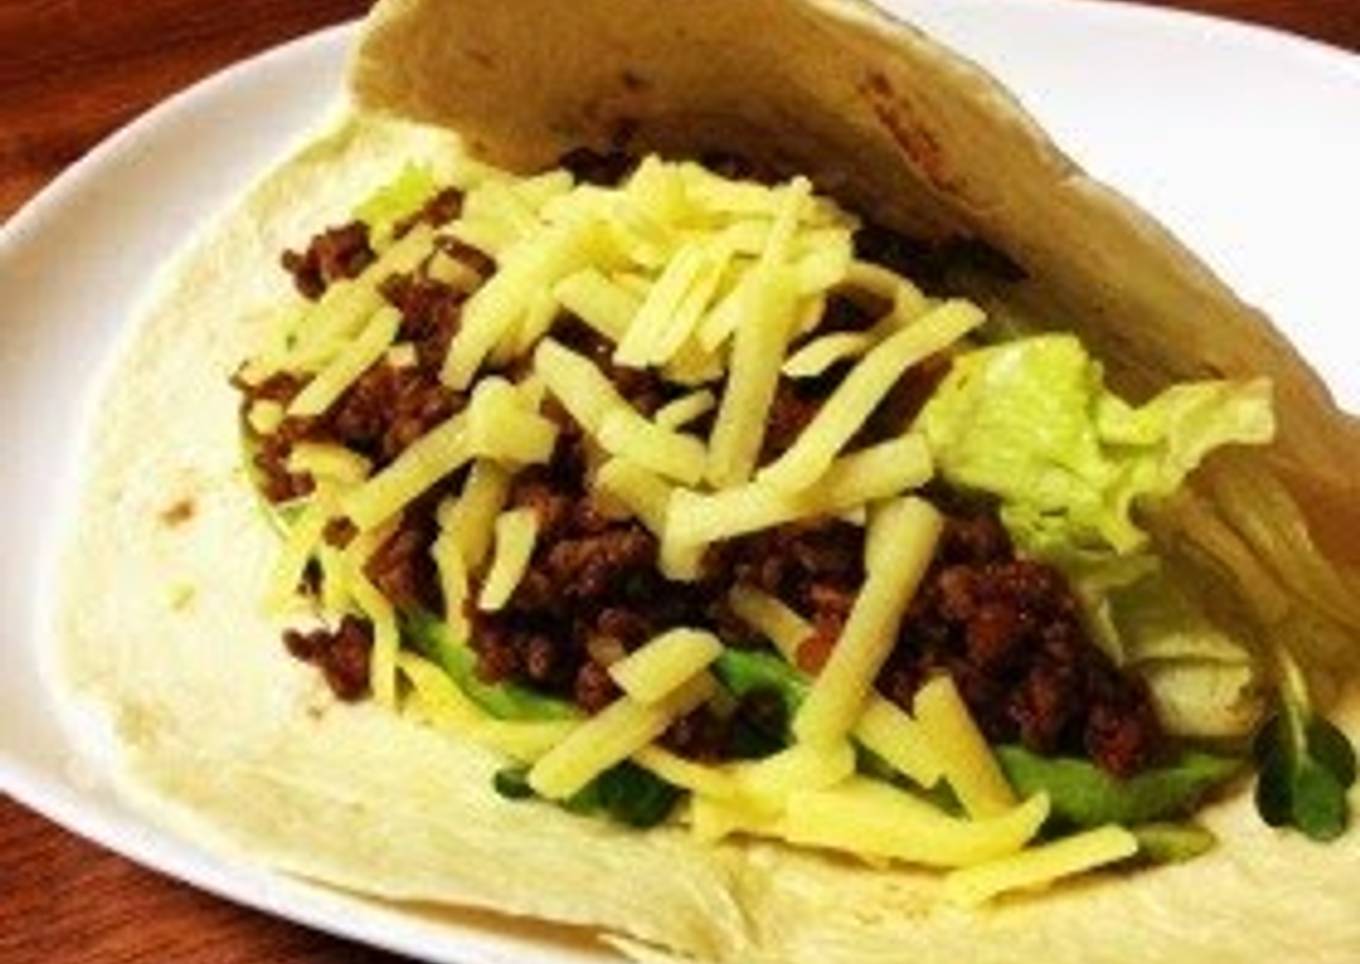 Taco Meat for Taco Rice or Tacos